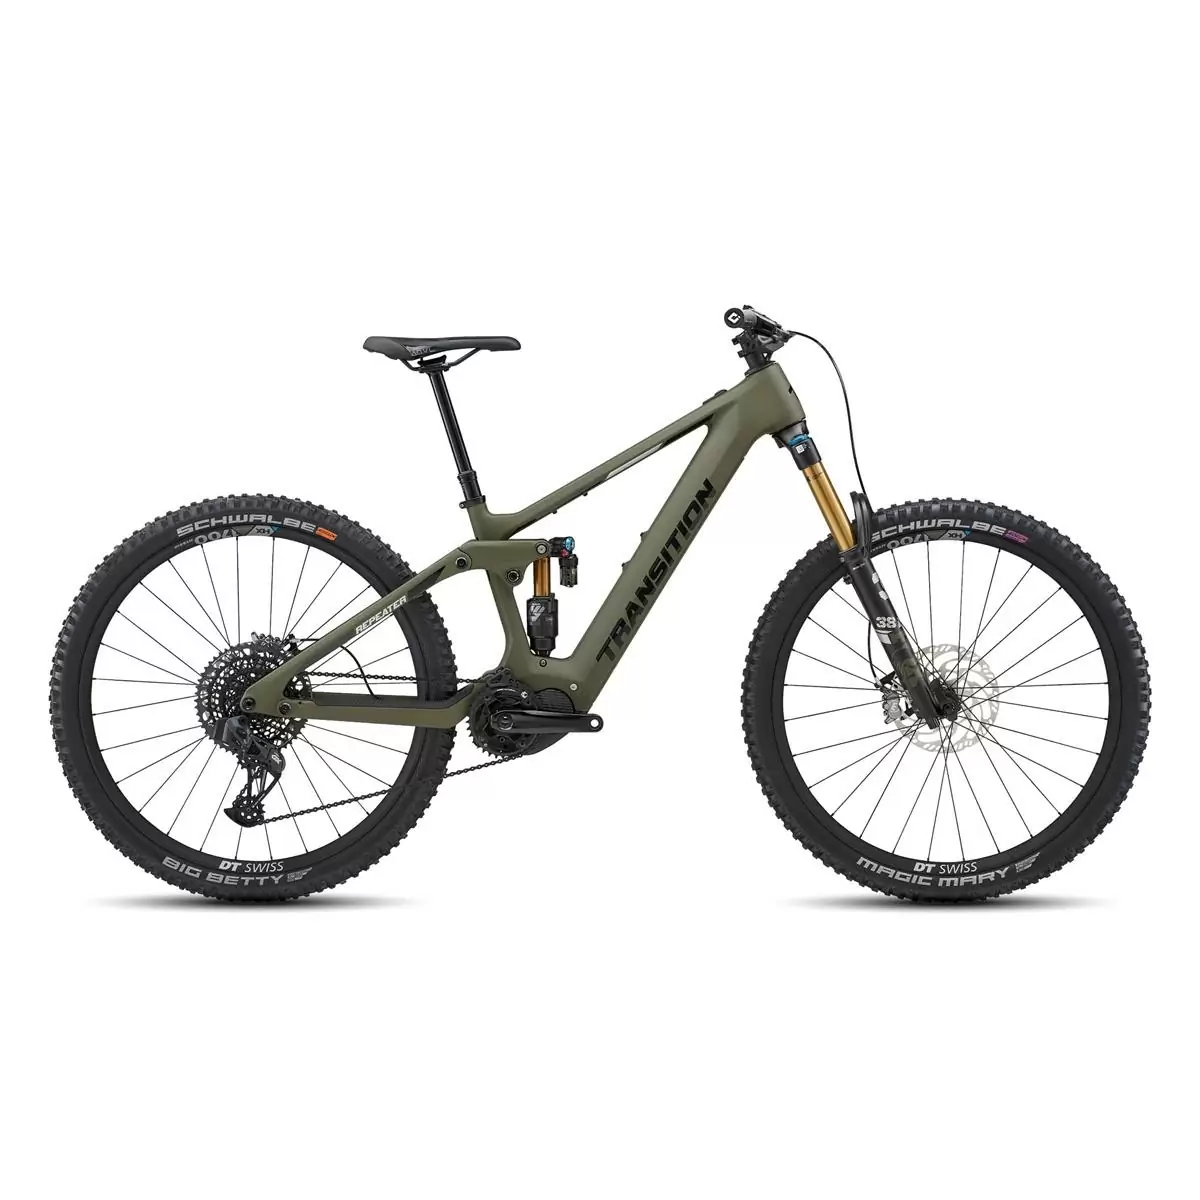 Repeater Carbon AXS 29'' 160mm 12v 630Wh Shimano EP8 Mossy Green Taglia XL - image